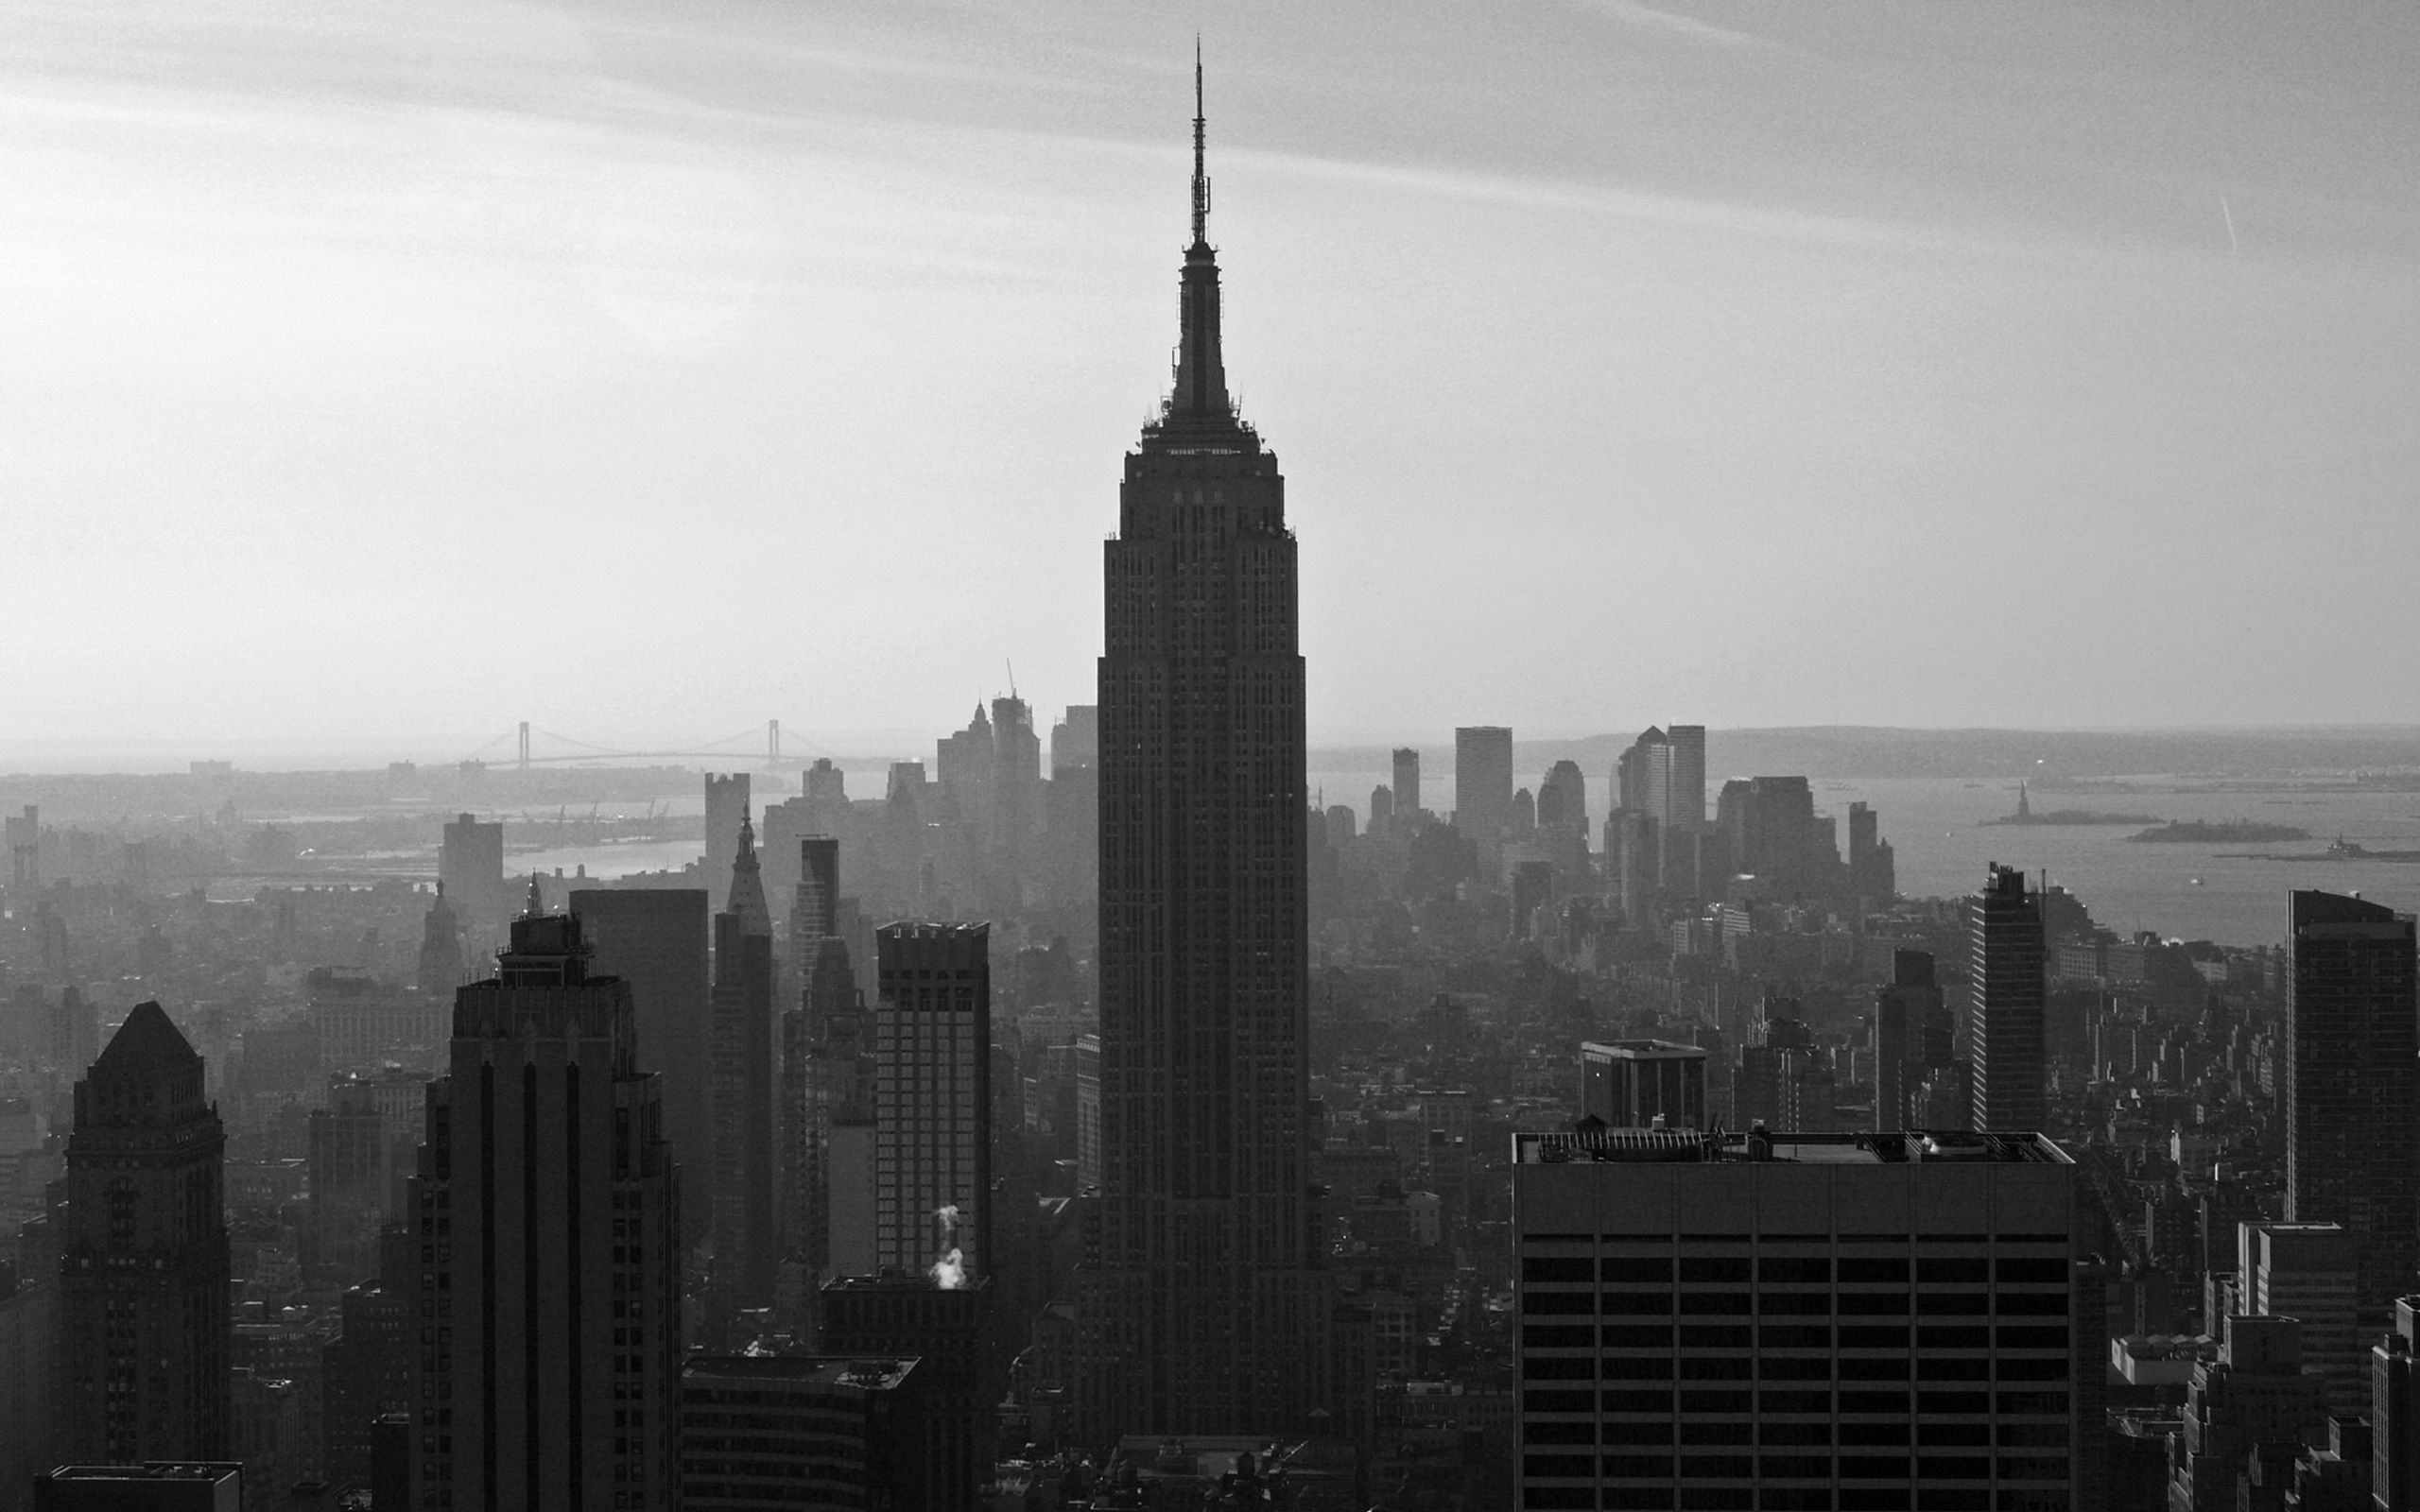 cityscapes, buildings, New York City, skyscrapers, Empire State Building - desktop wallpaper